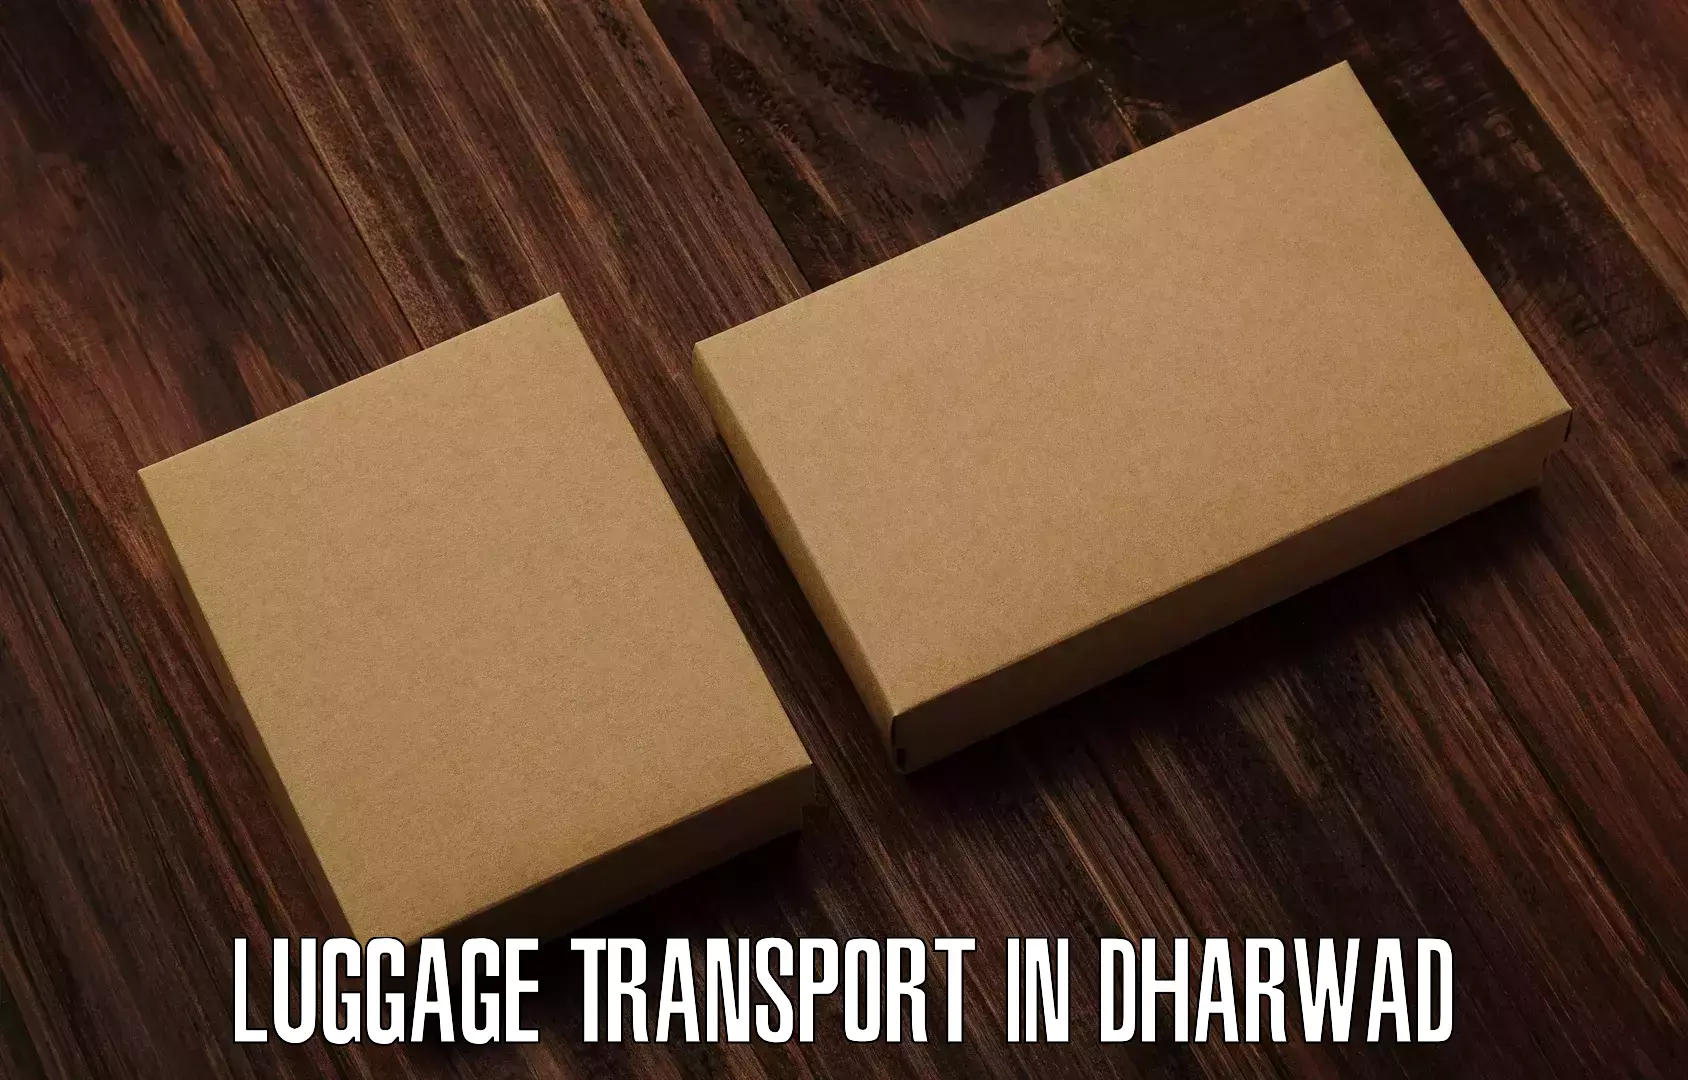 Simplified luggage transport in Dharwad